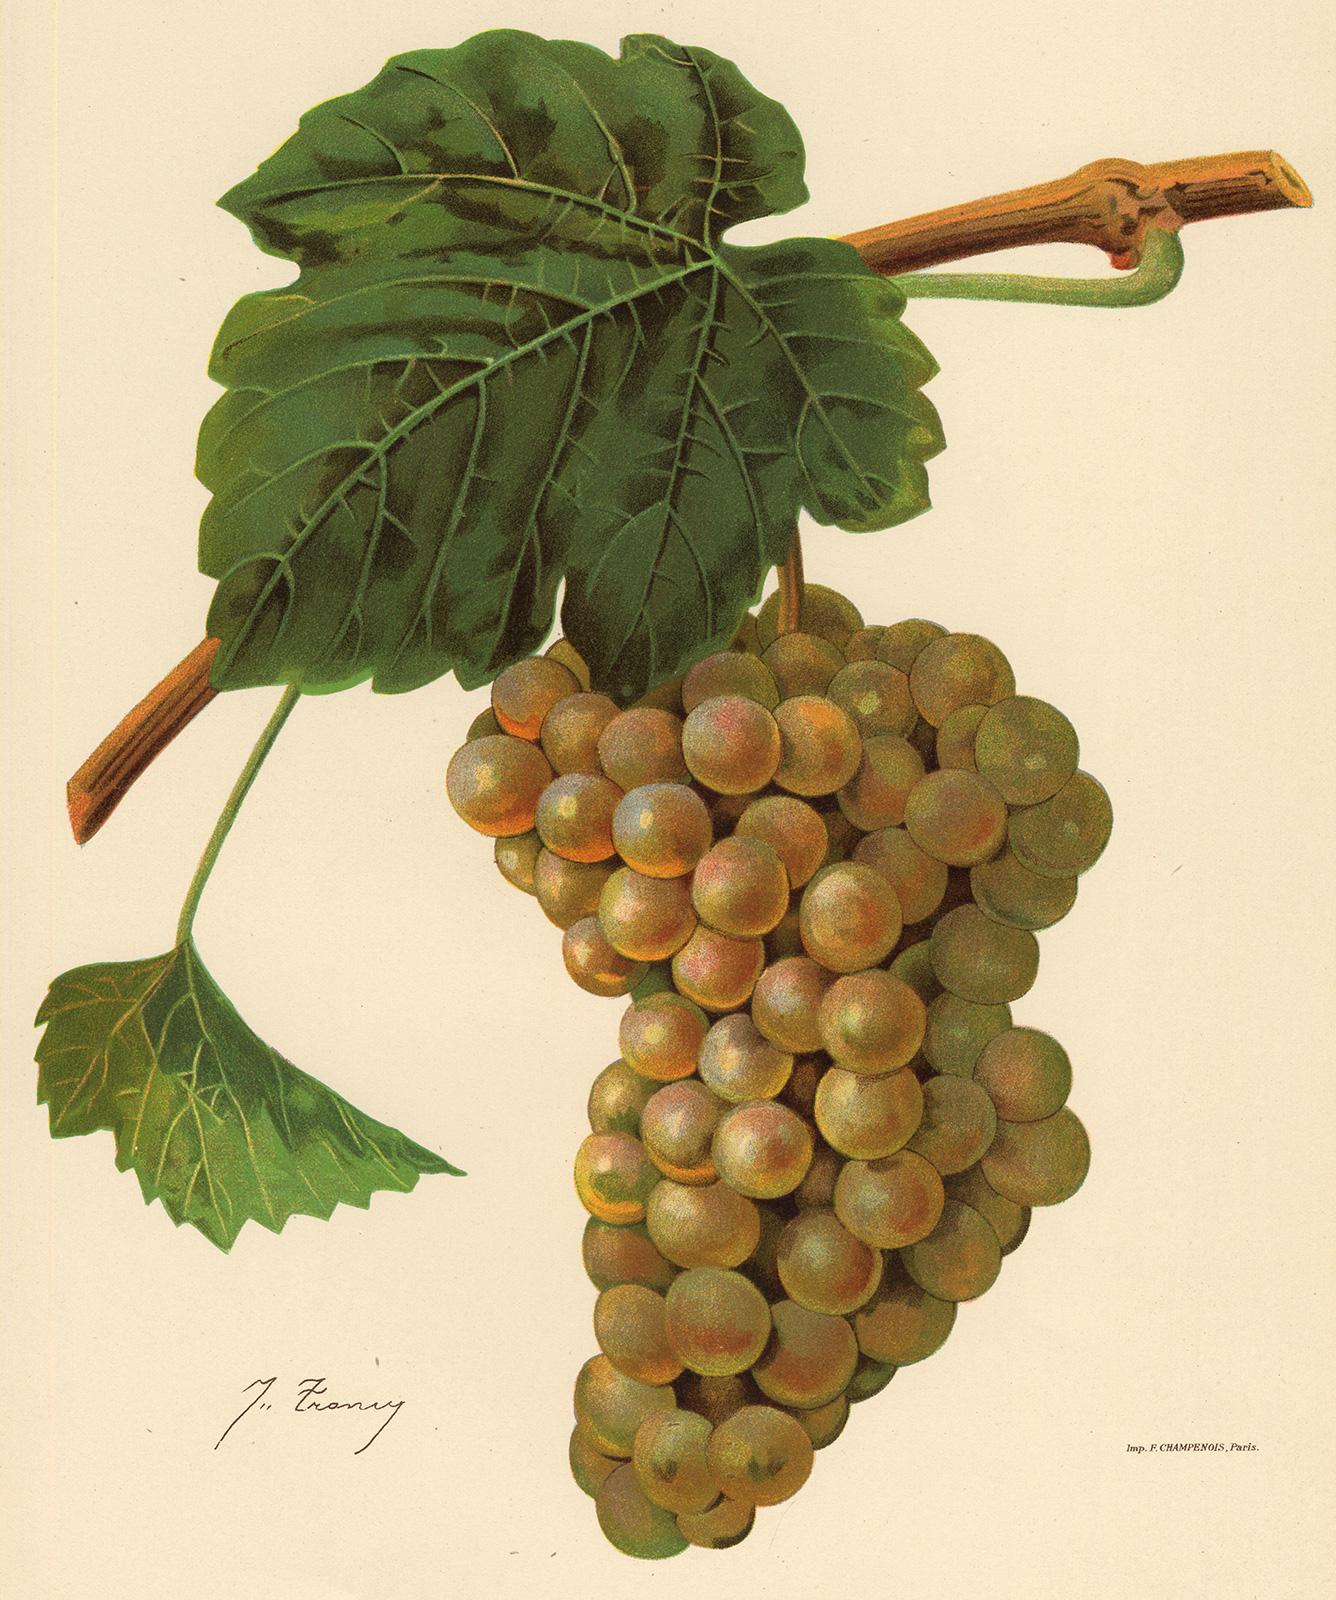 Victor Vermorel Print - The Jean grape - from Ampelography by Vermorel - Lithograph - Early 20th century